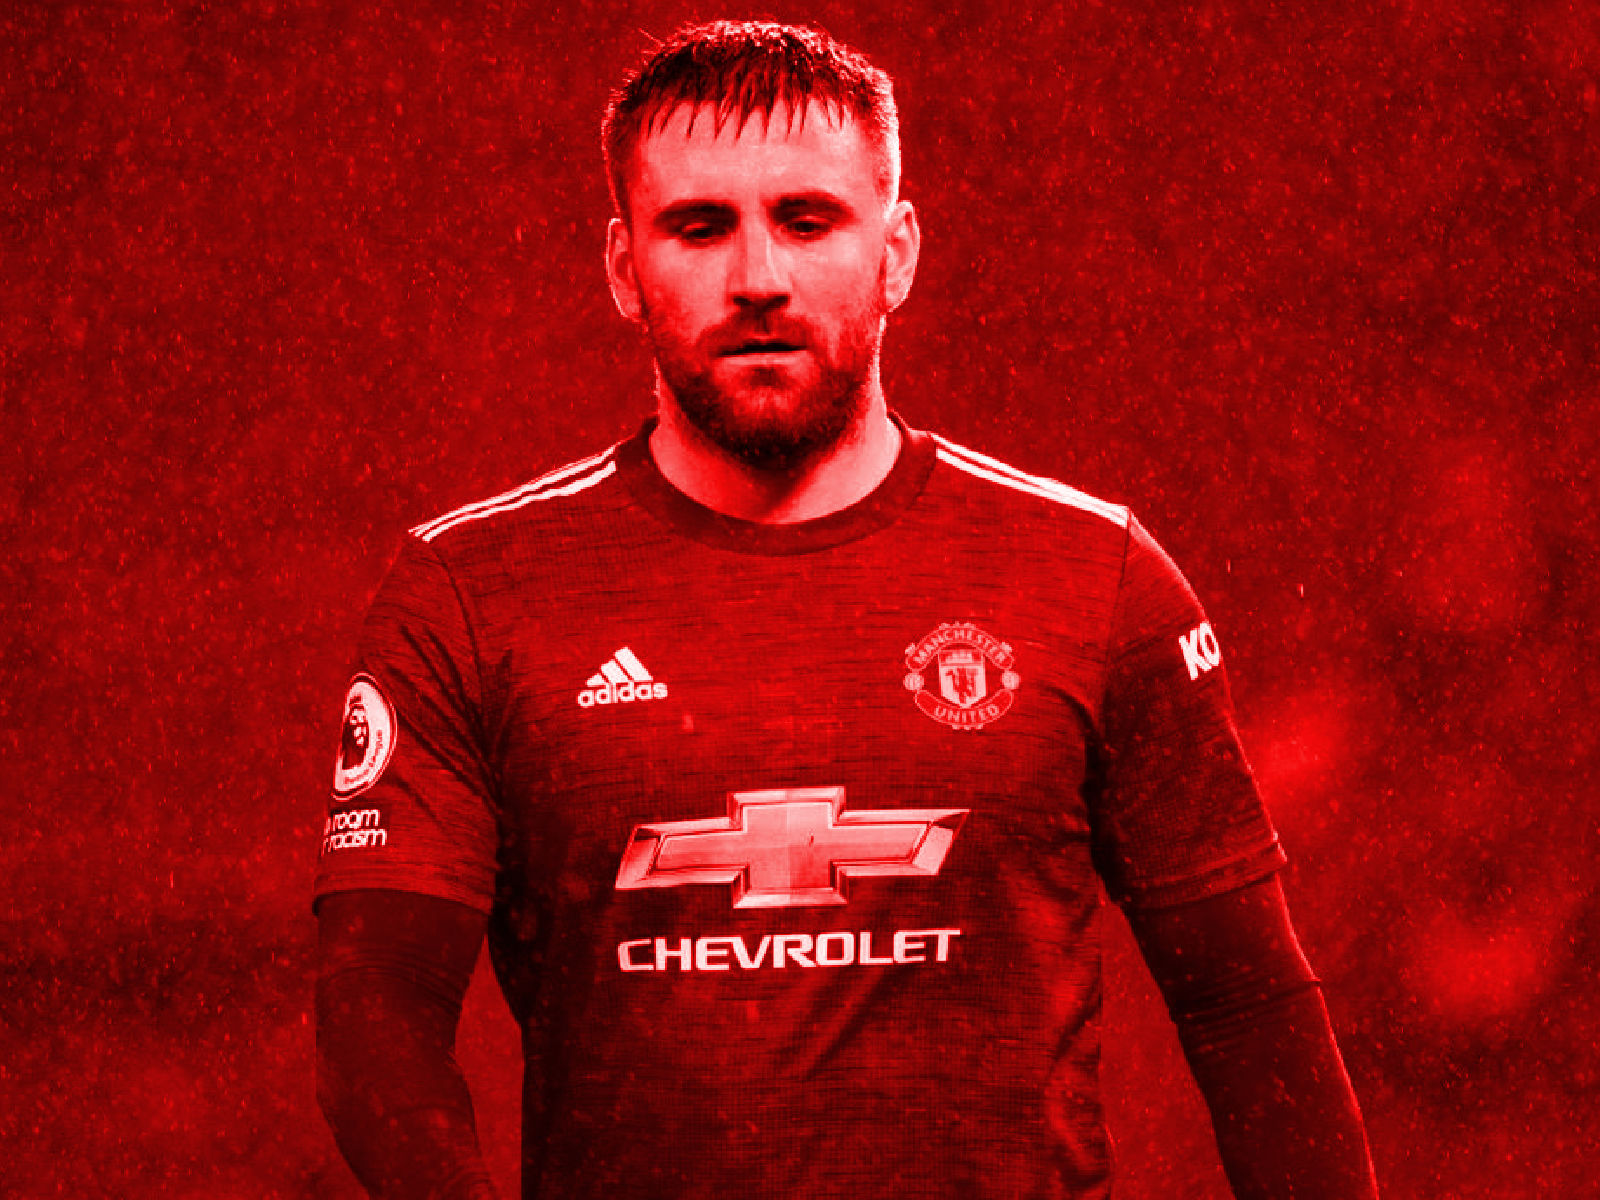 Official Call of Duty account responds after Luke Shaw is accused of timing his injuries around game’s new releases